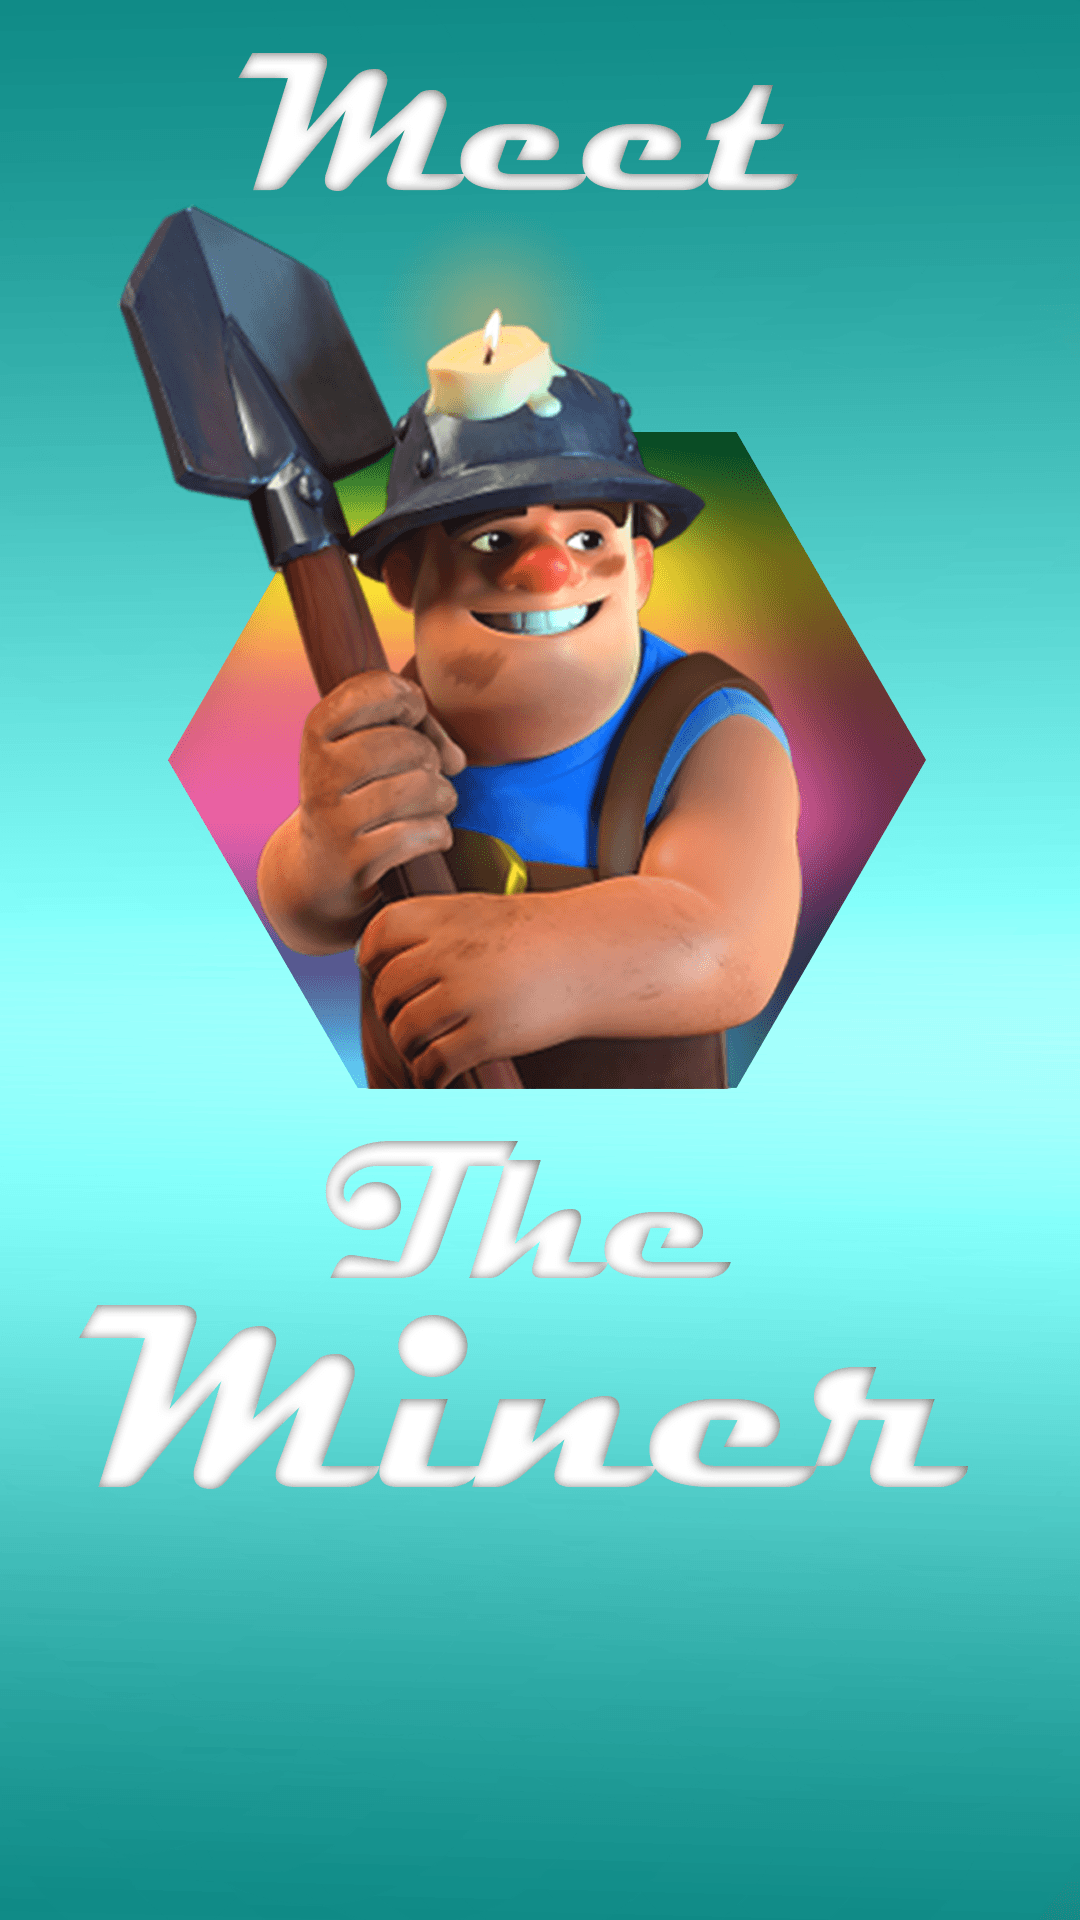 Art 1080 * 1920 Miner Phone Wallpaper. If you want any more cards